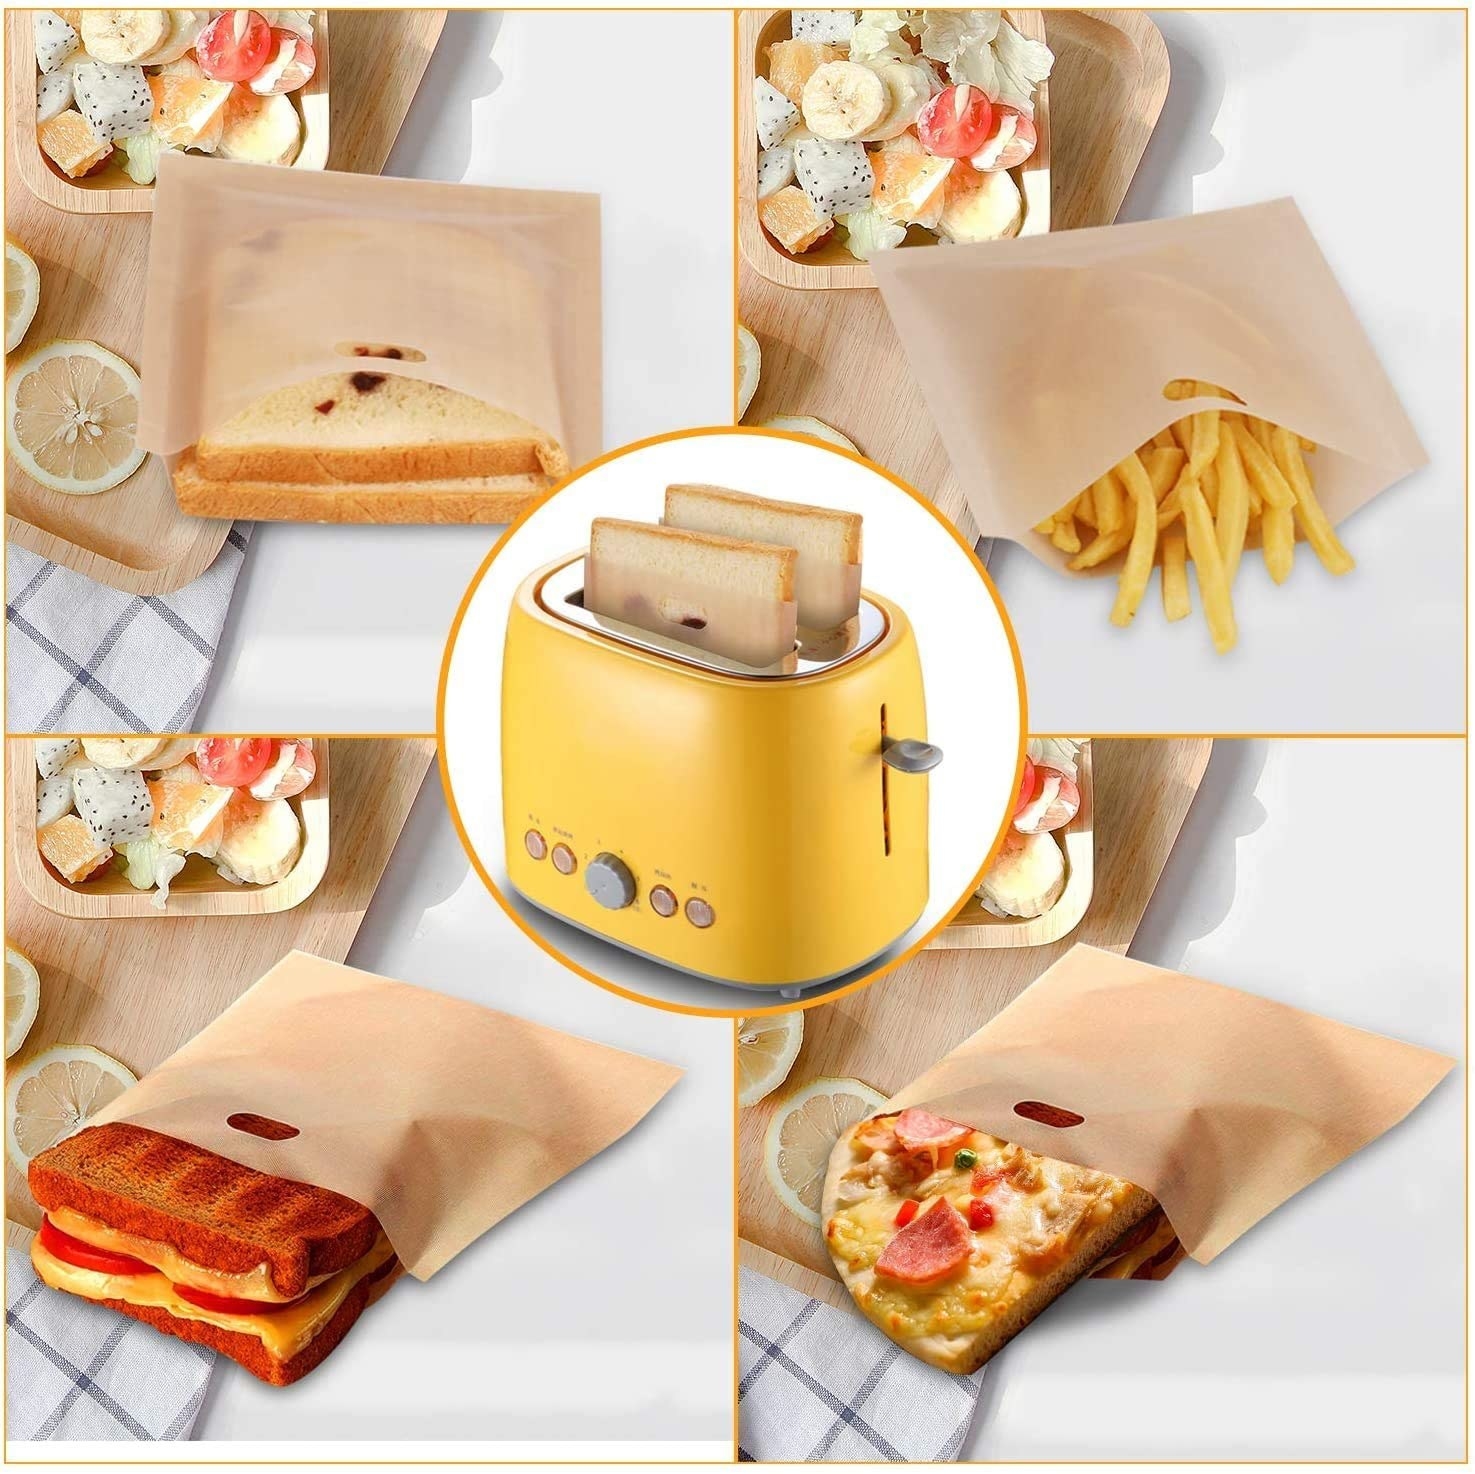 The toaster bags can be used to make grilled cheese, heat up fries, and re-heat pizza in the toaster